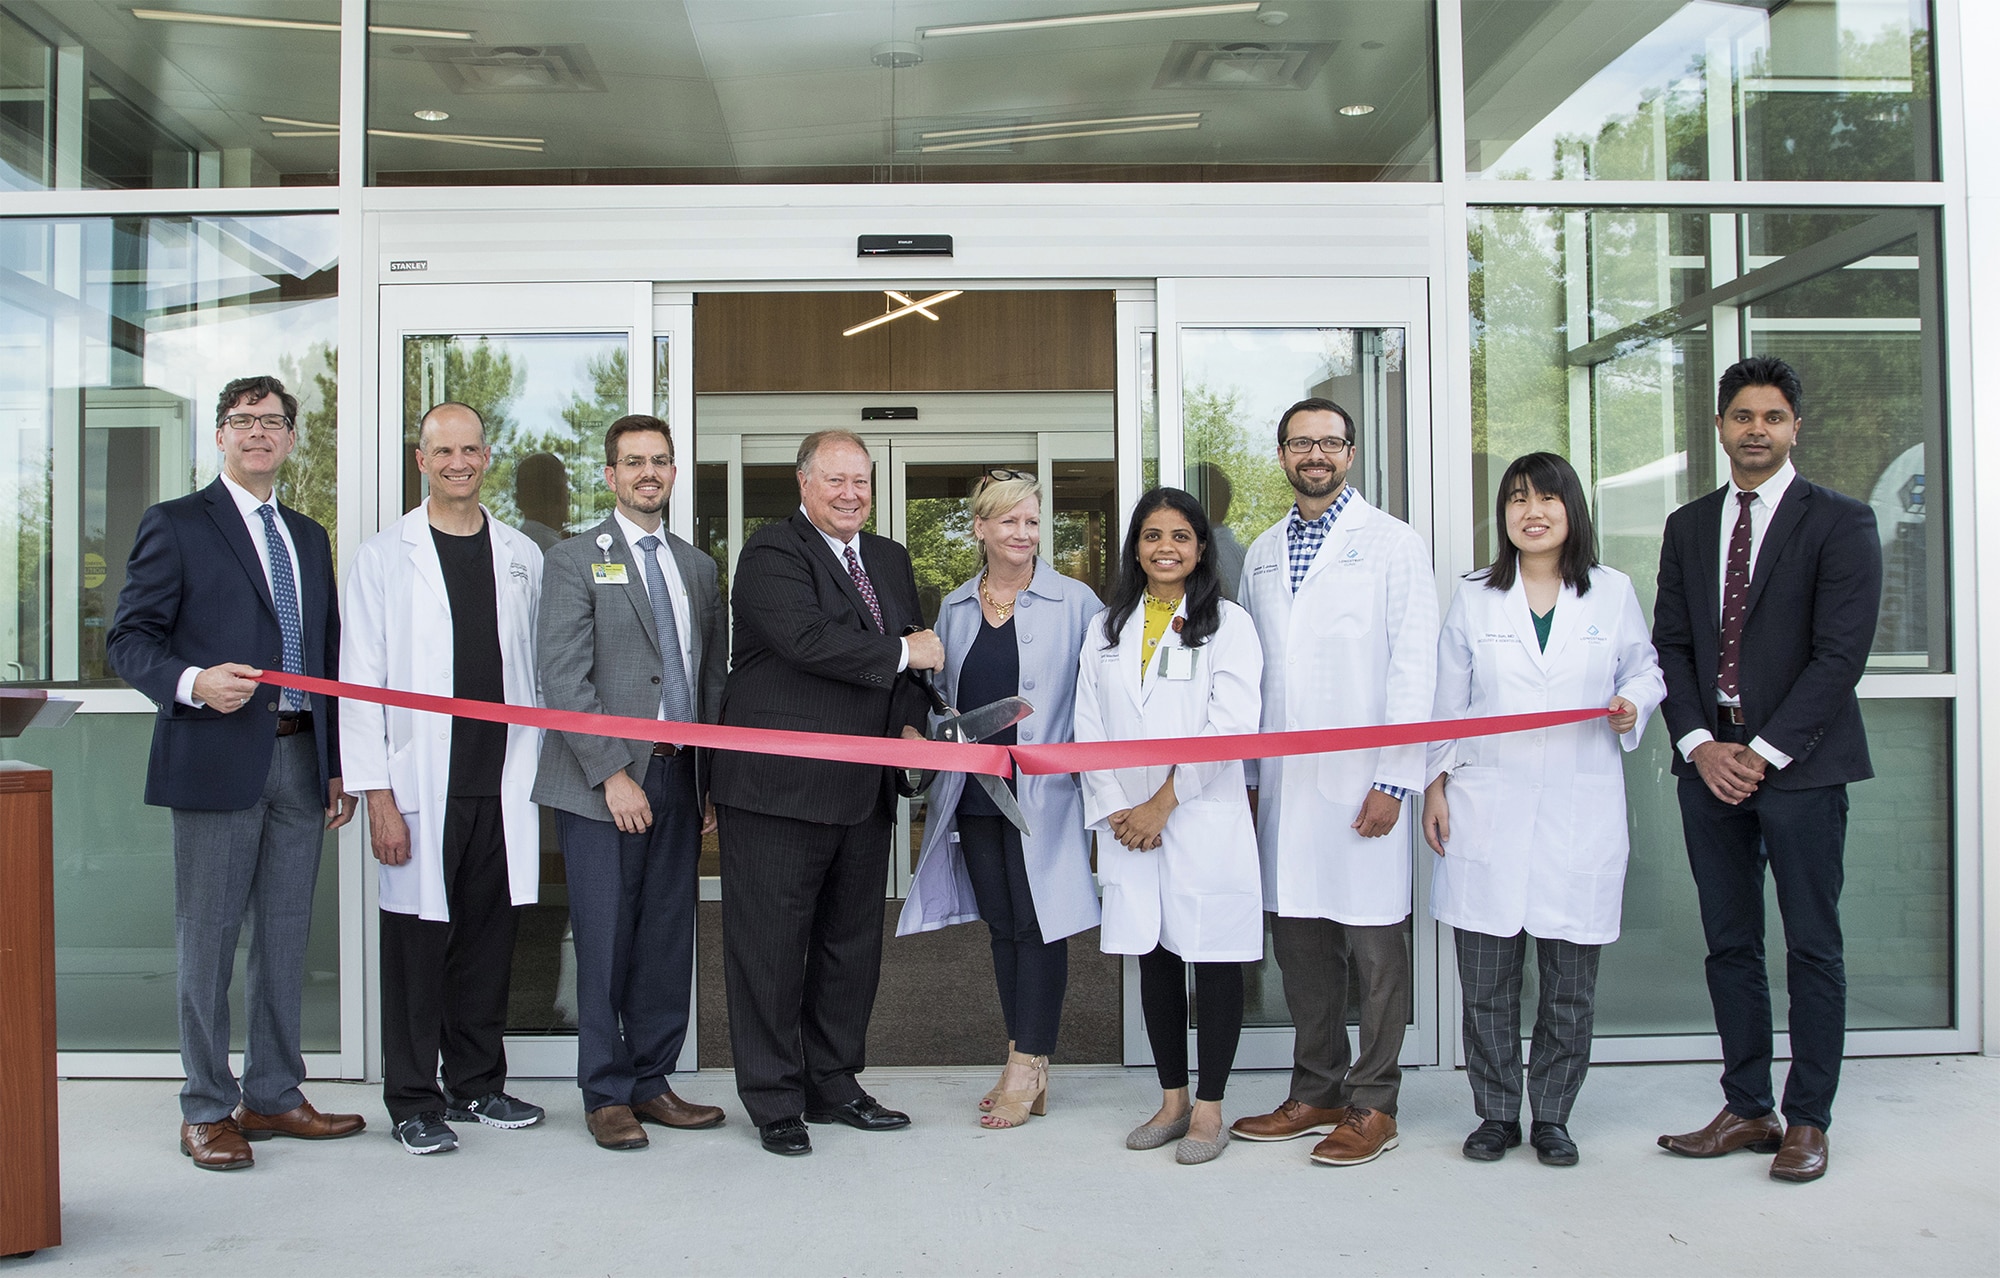 Braselton’s Newest Cancer Center Opens to Patients